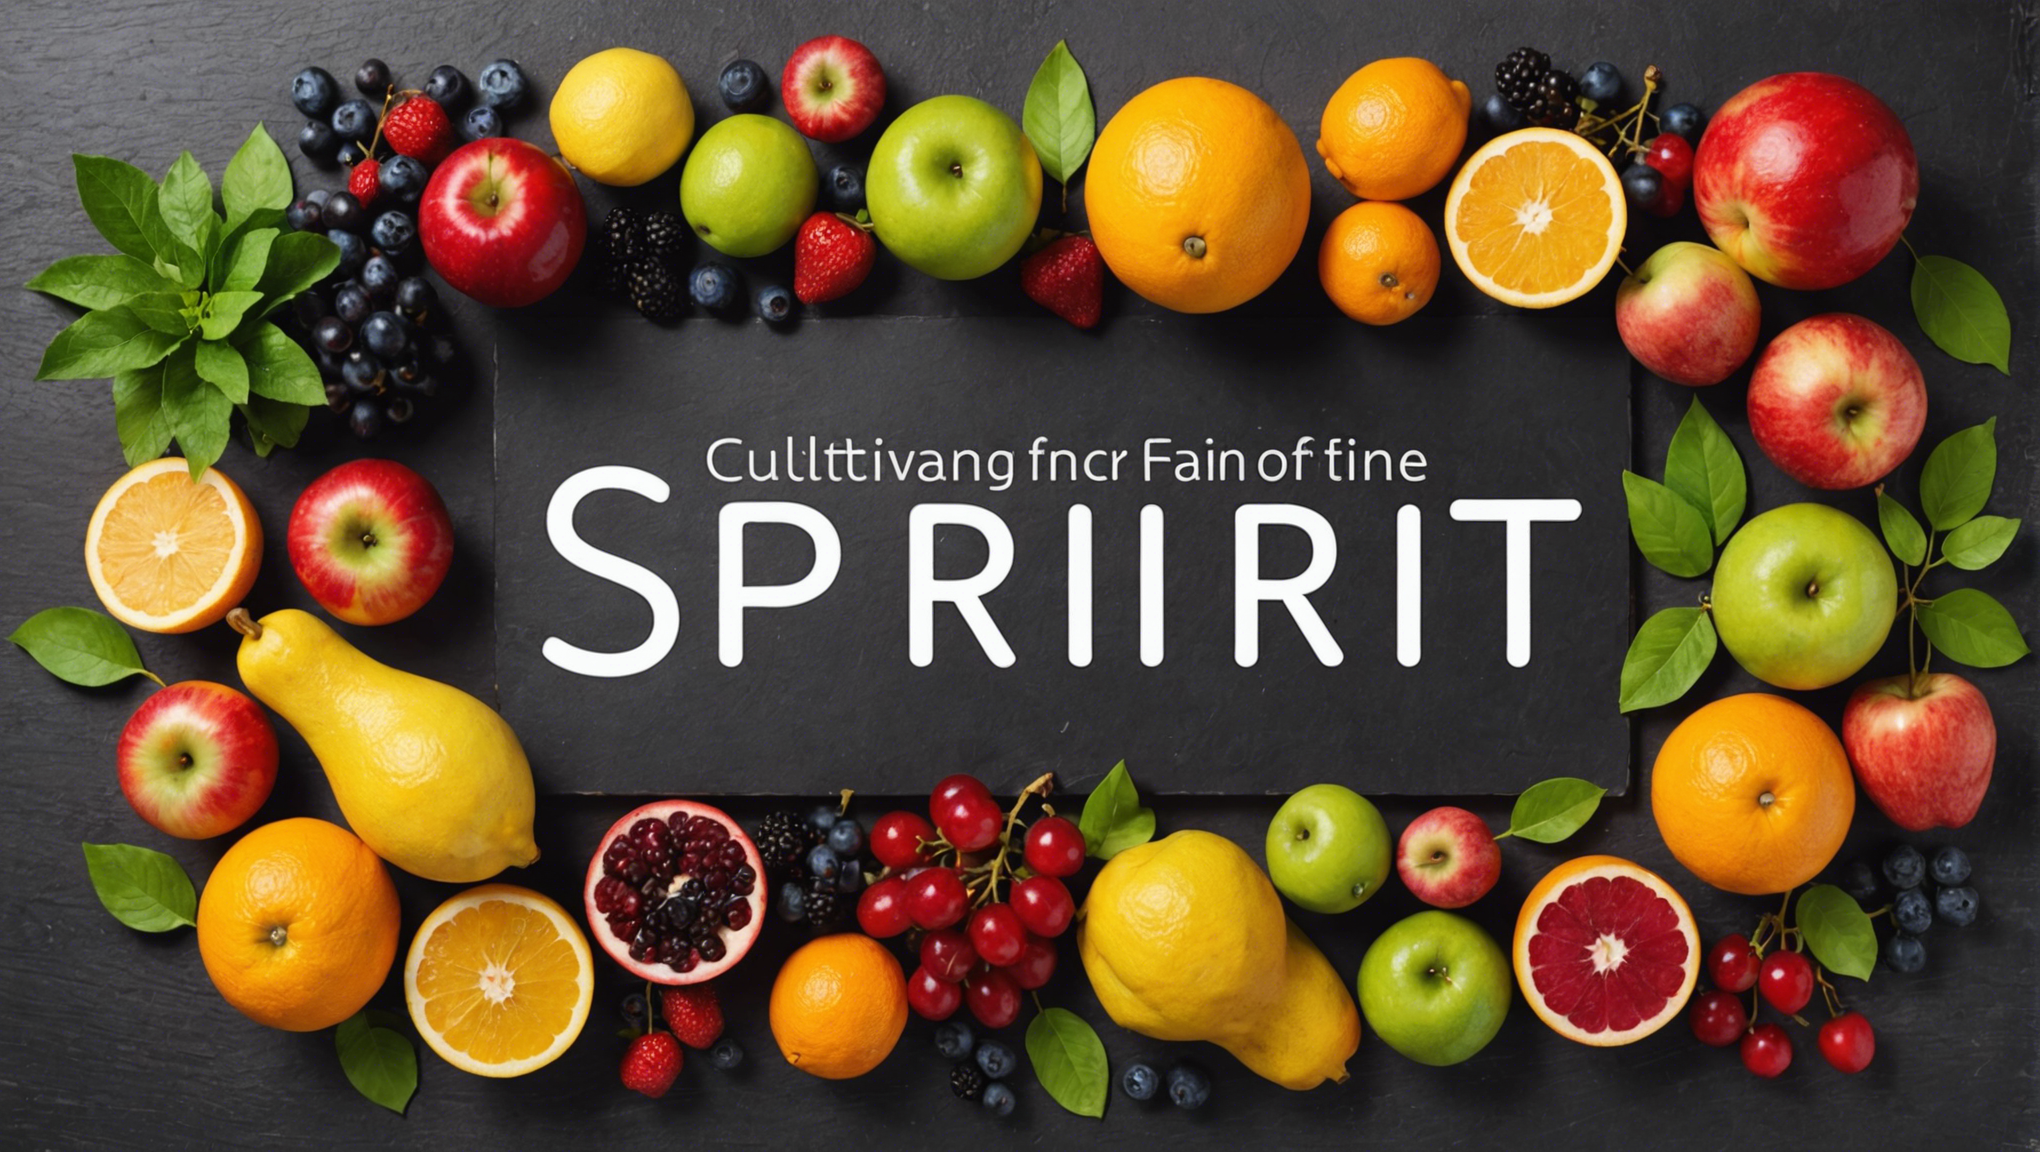 explore how cultivating the fruit of the spirit can lead to transformation in your personal development and relationships.